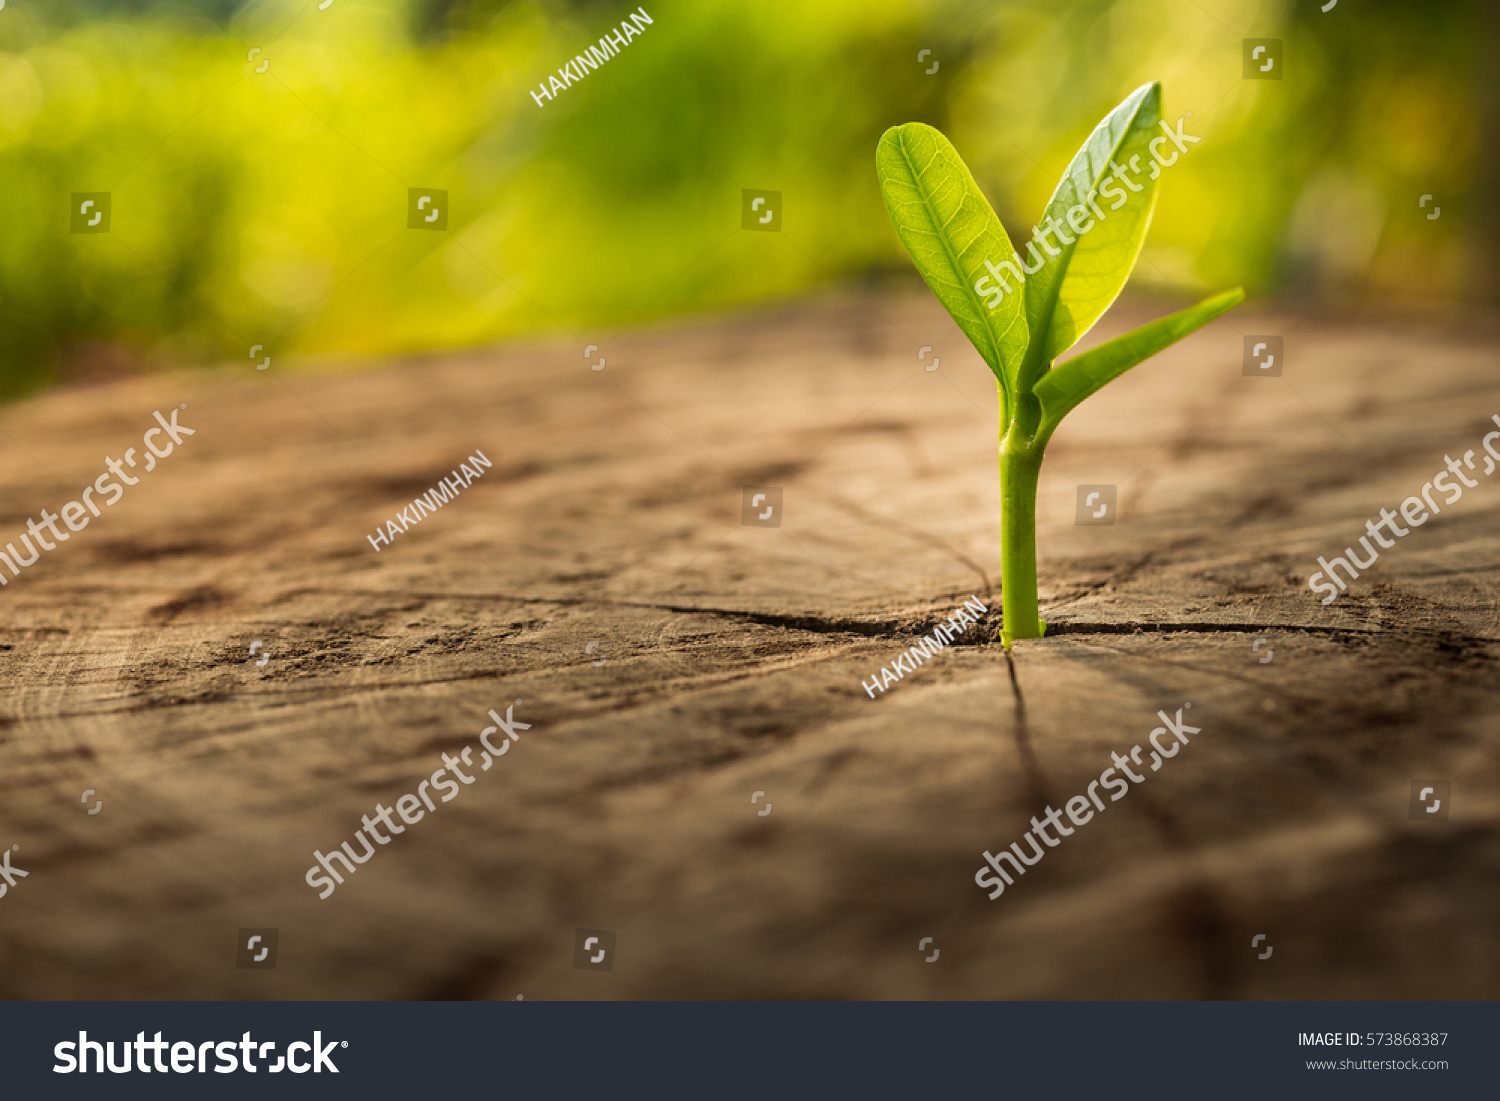 New Life idea concept with seedling growing sprout (tree).business development and eco symbolic. #573868387